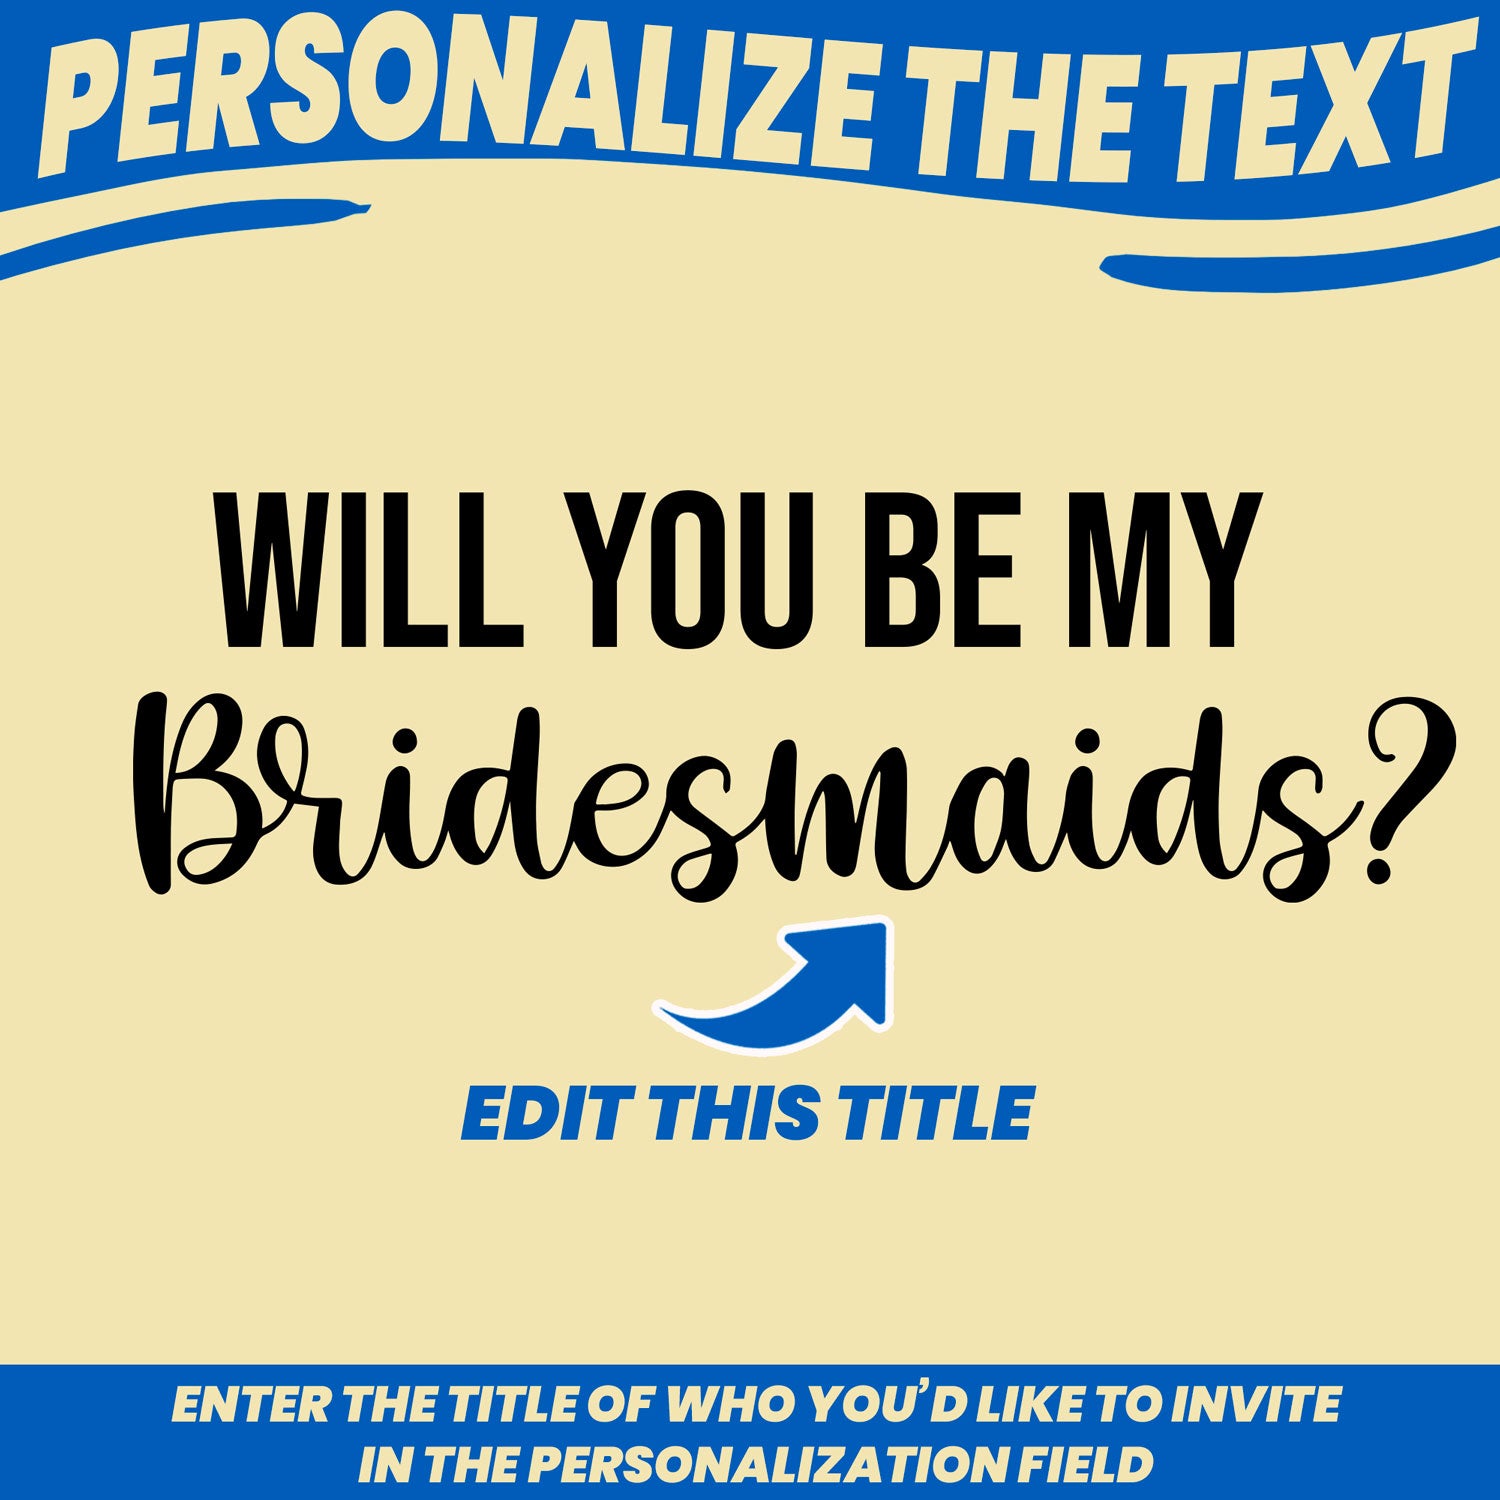 will you be my bridesmaids gift socks personalized with faces editable text to go on socks